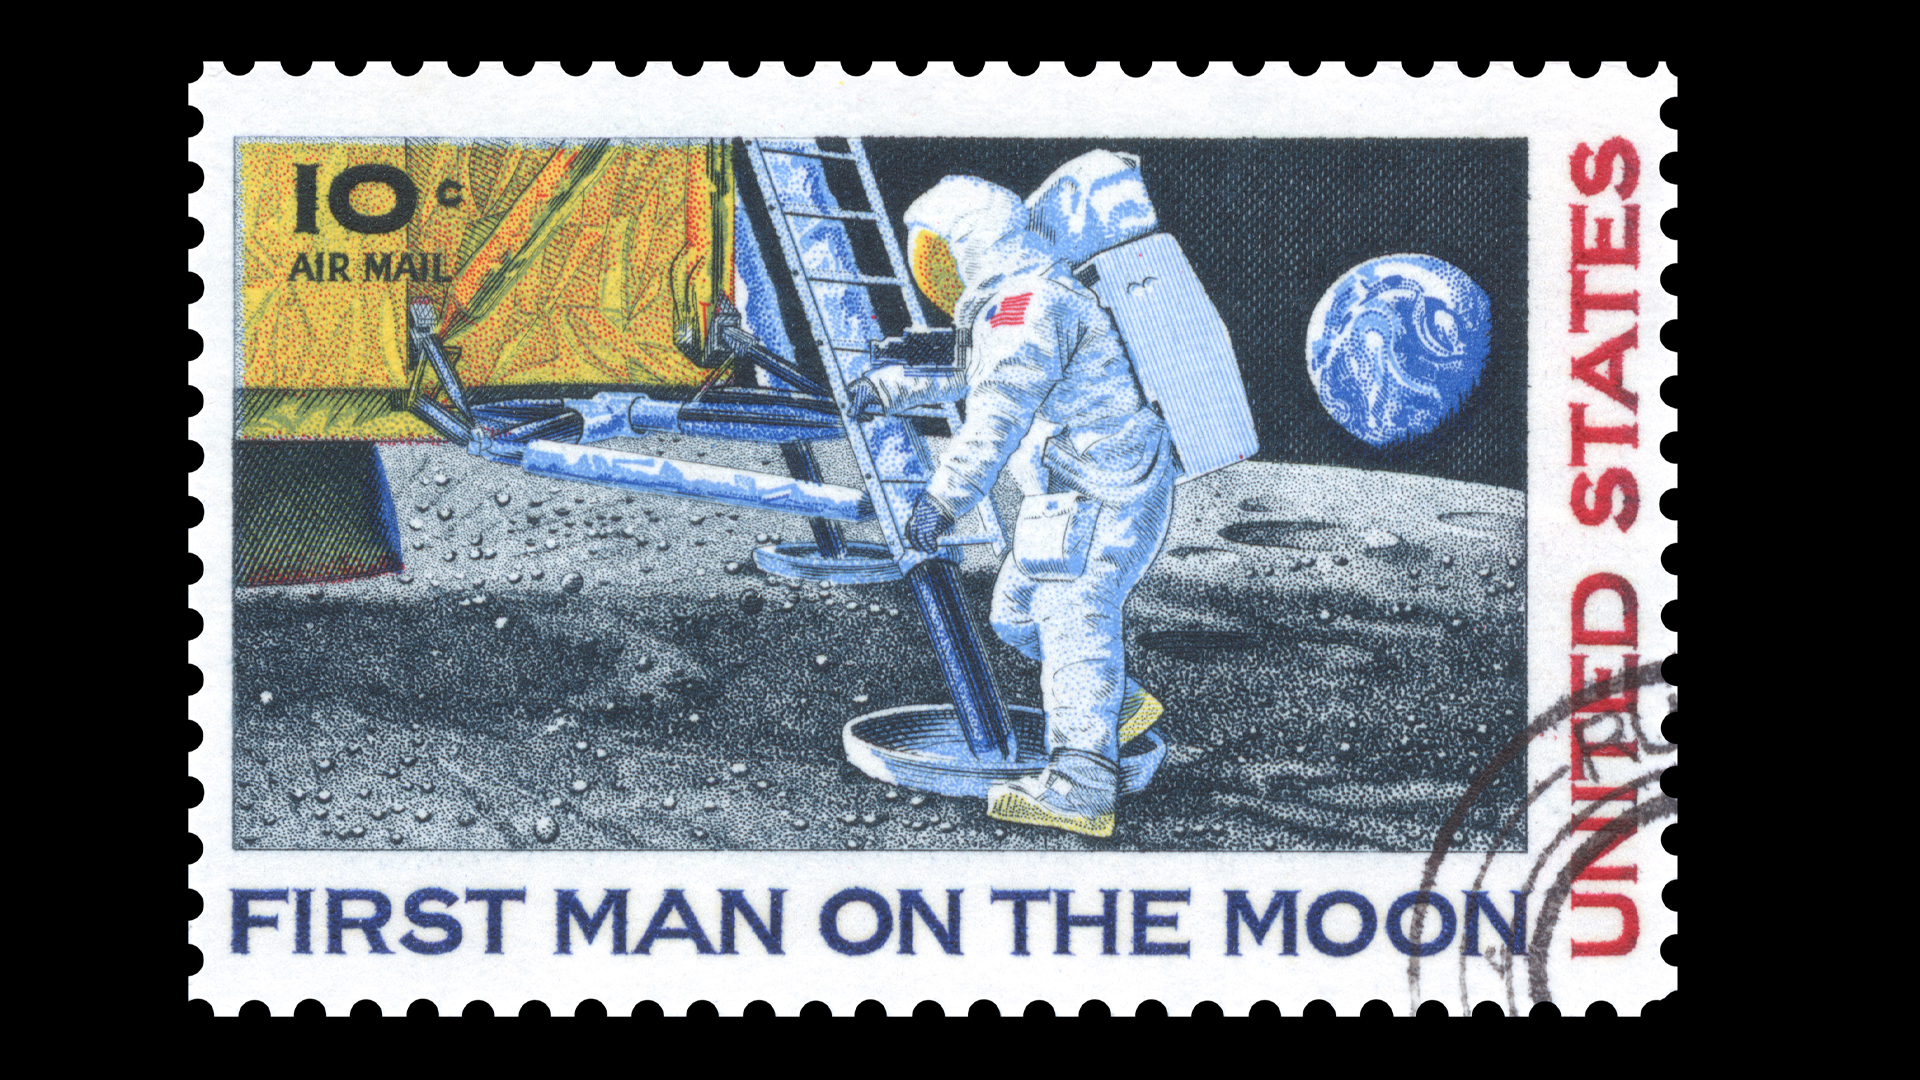 A stamp depicting an American astronaut on the moon